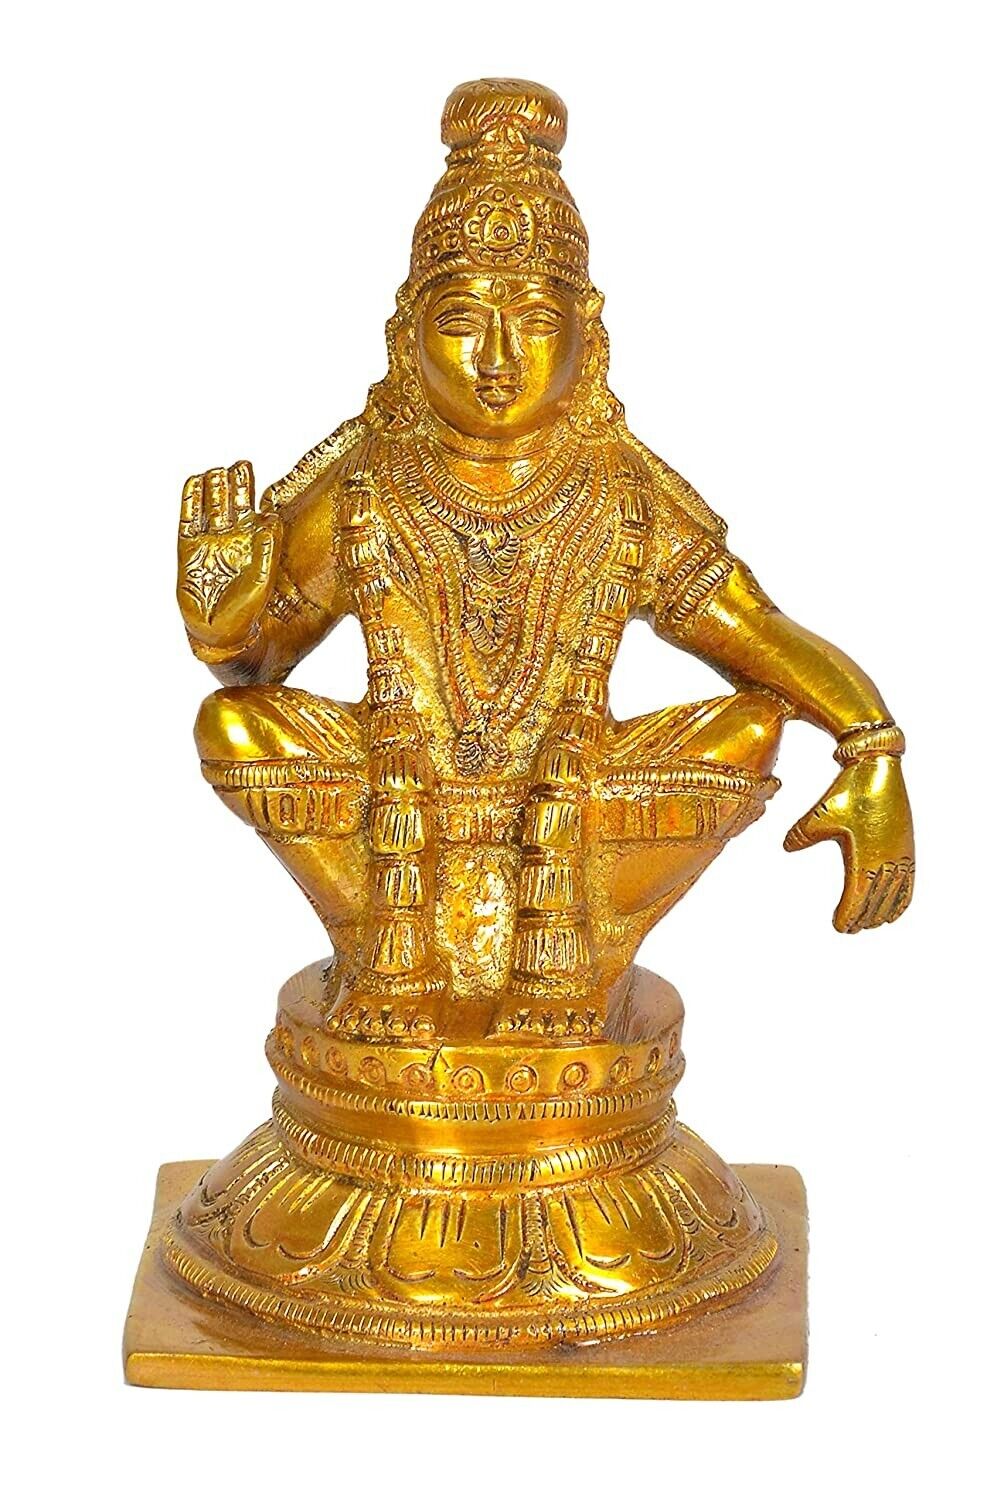 Brass Seated Lord Ayyappan Decorative Showpiece Figurine Statue For Home Temple